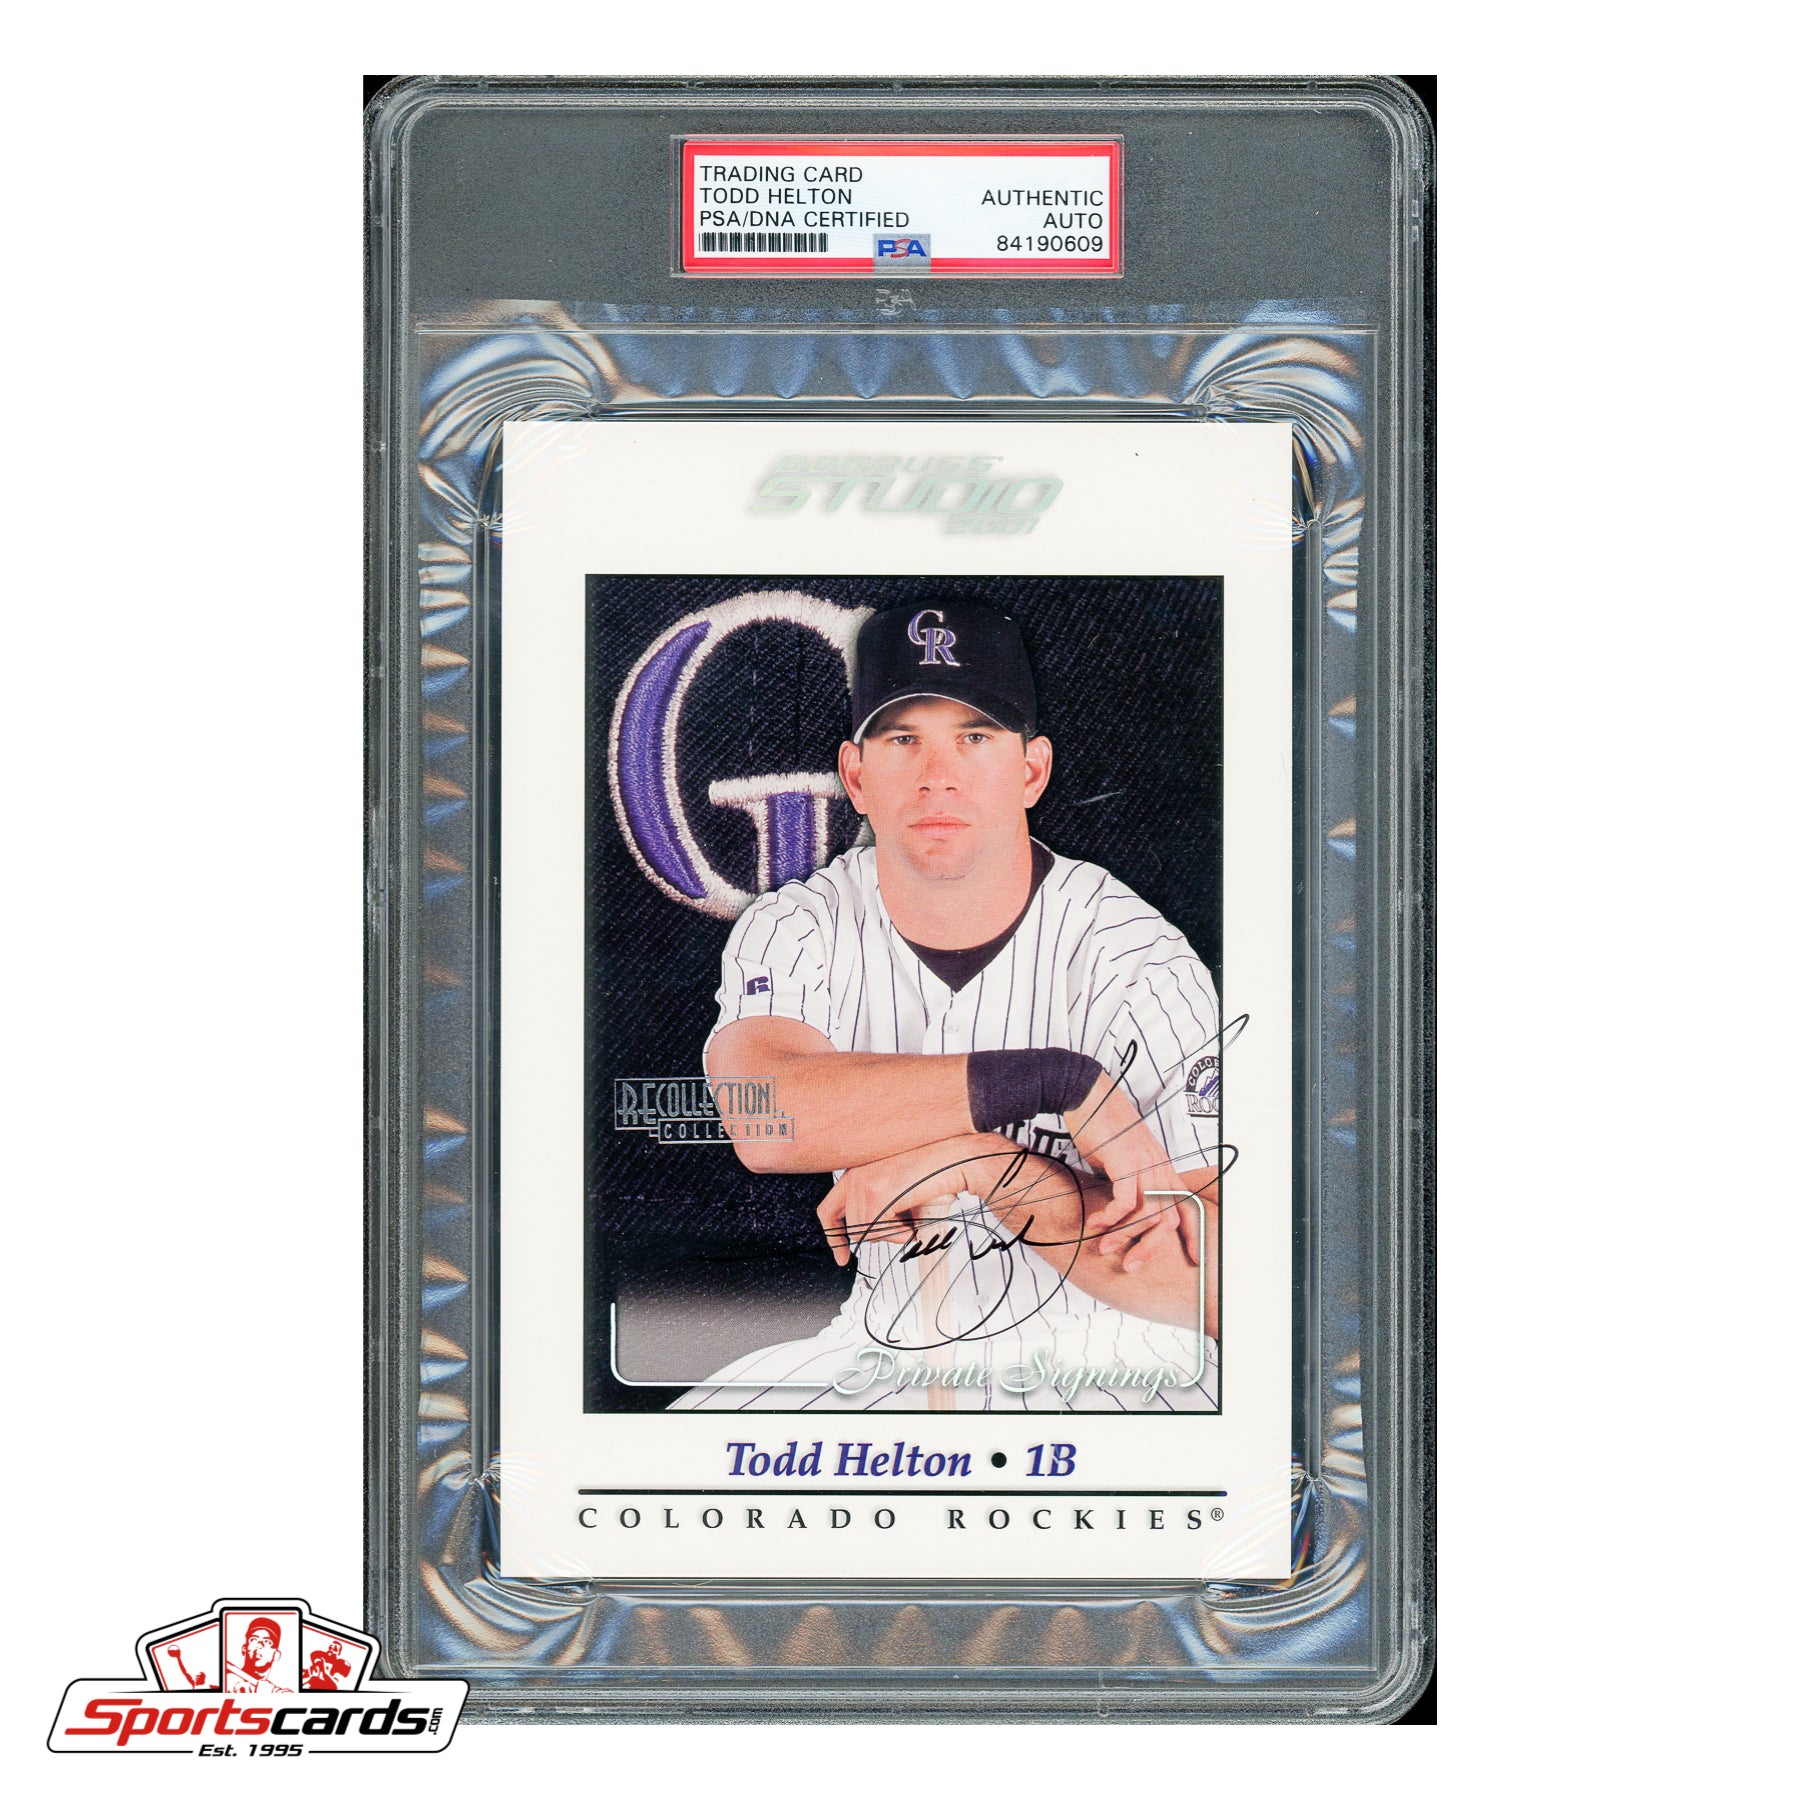 2001 Donruss Studio Todd Helton Private Signings Oversized Card PSA/DNA